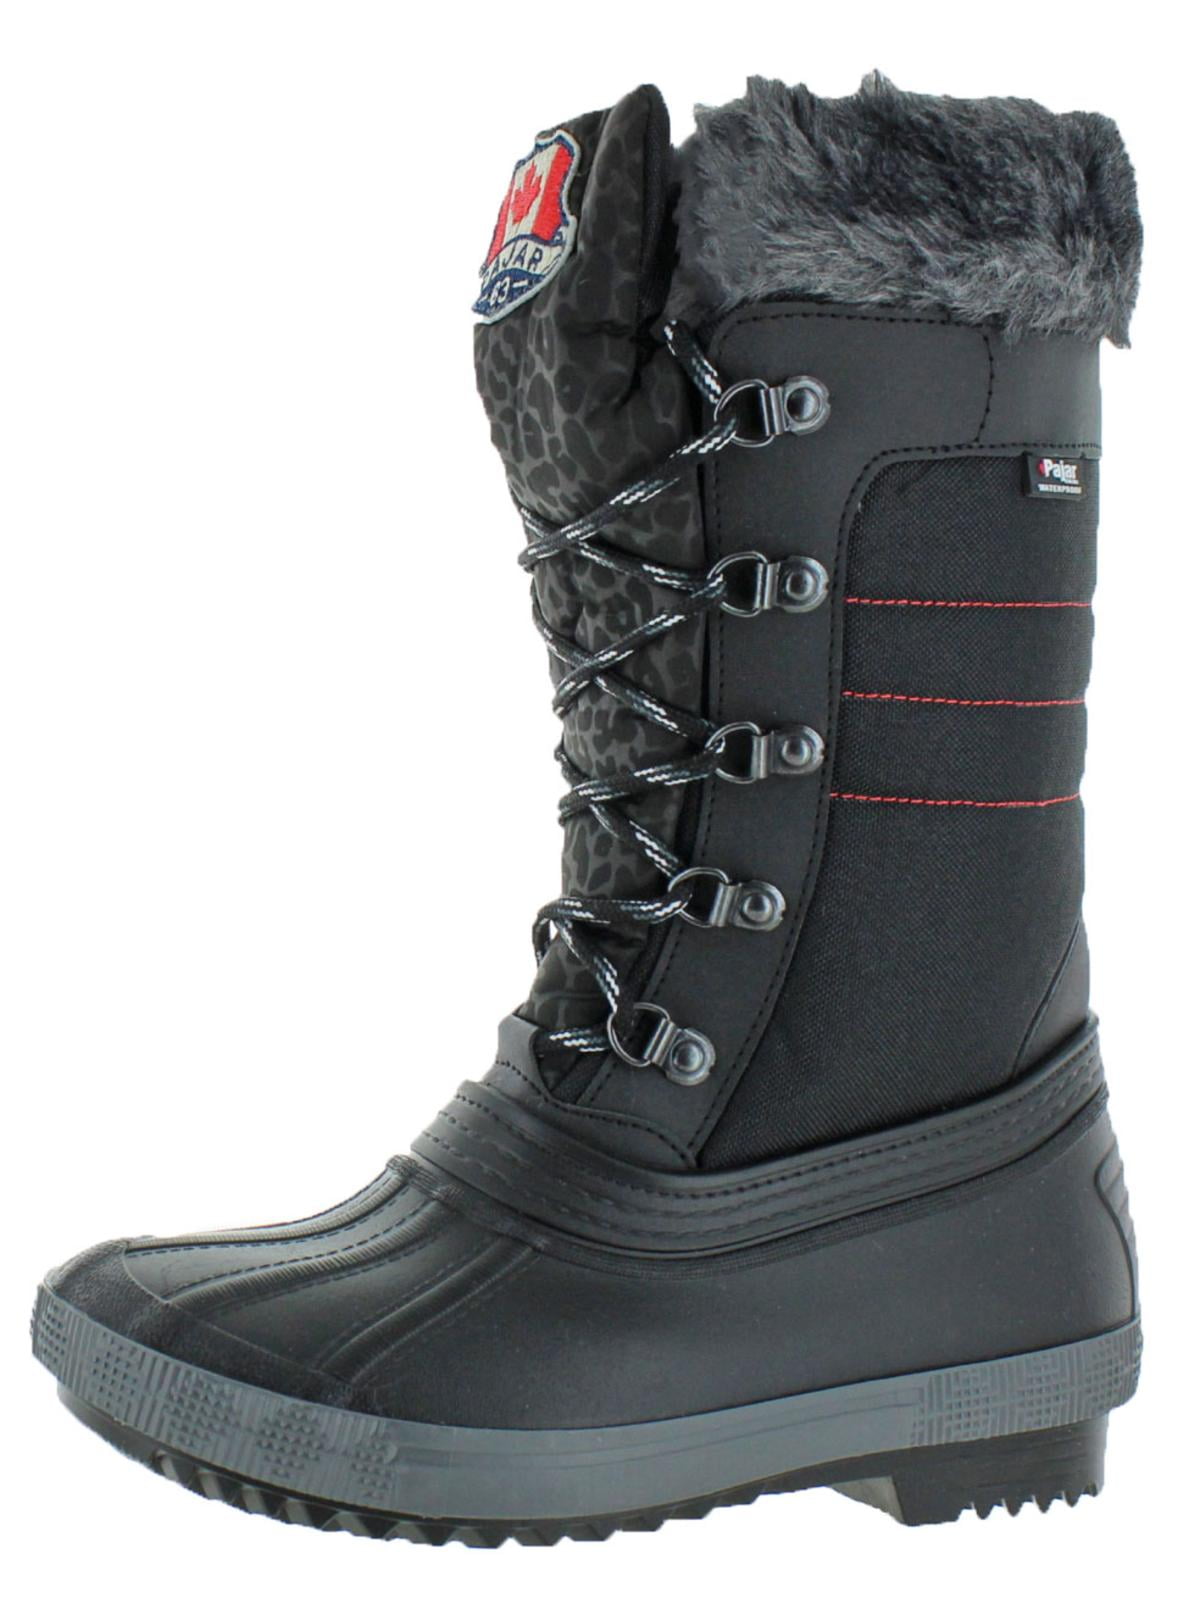 the bay pajar women's boots